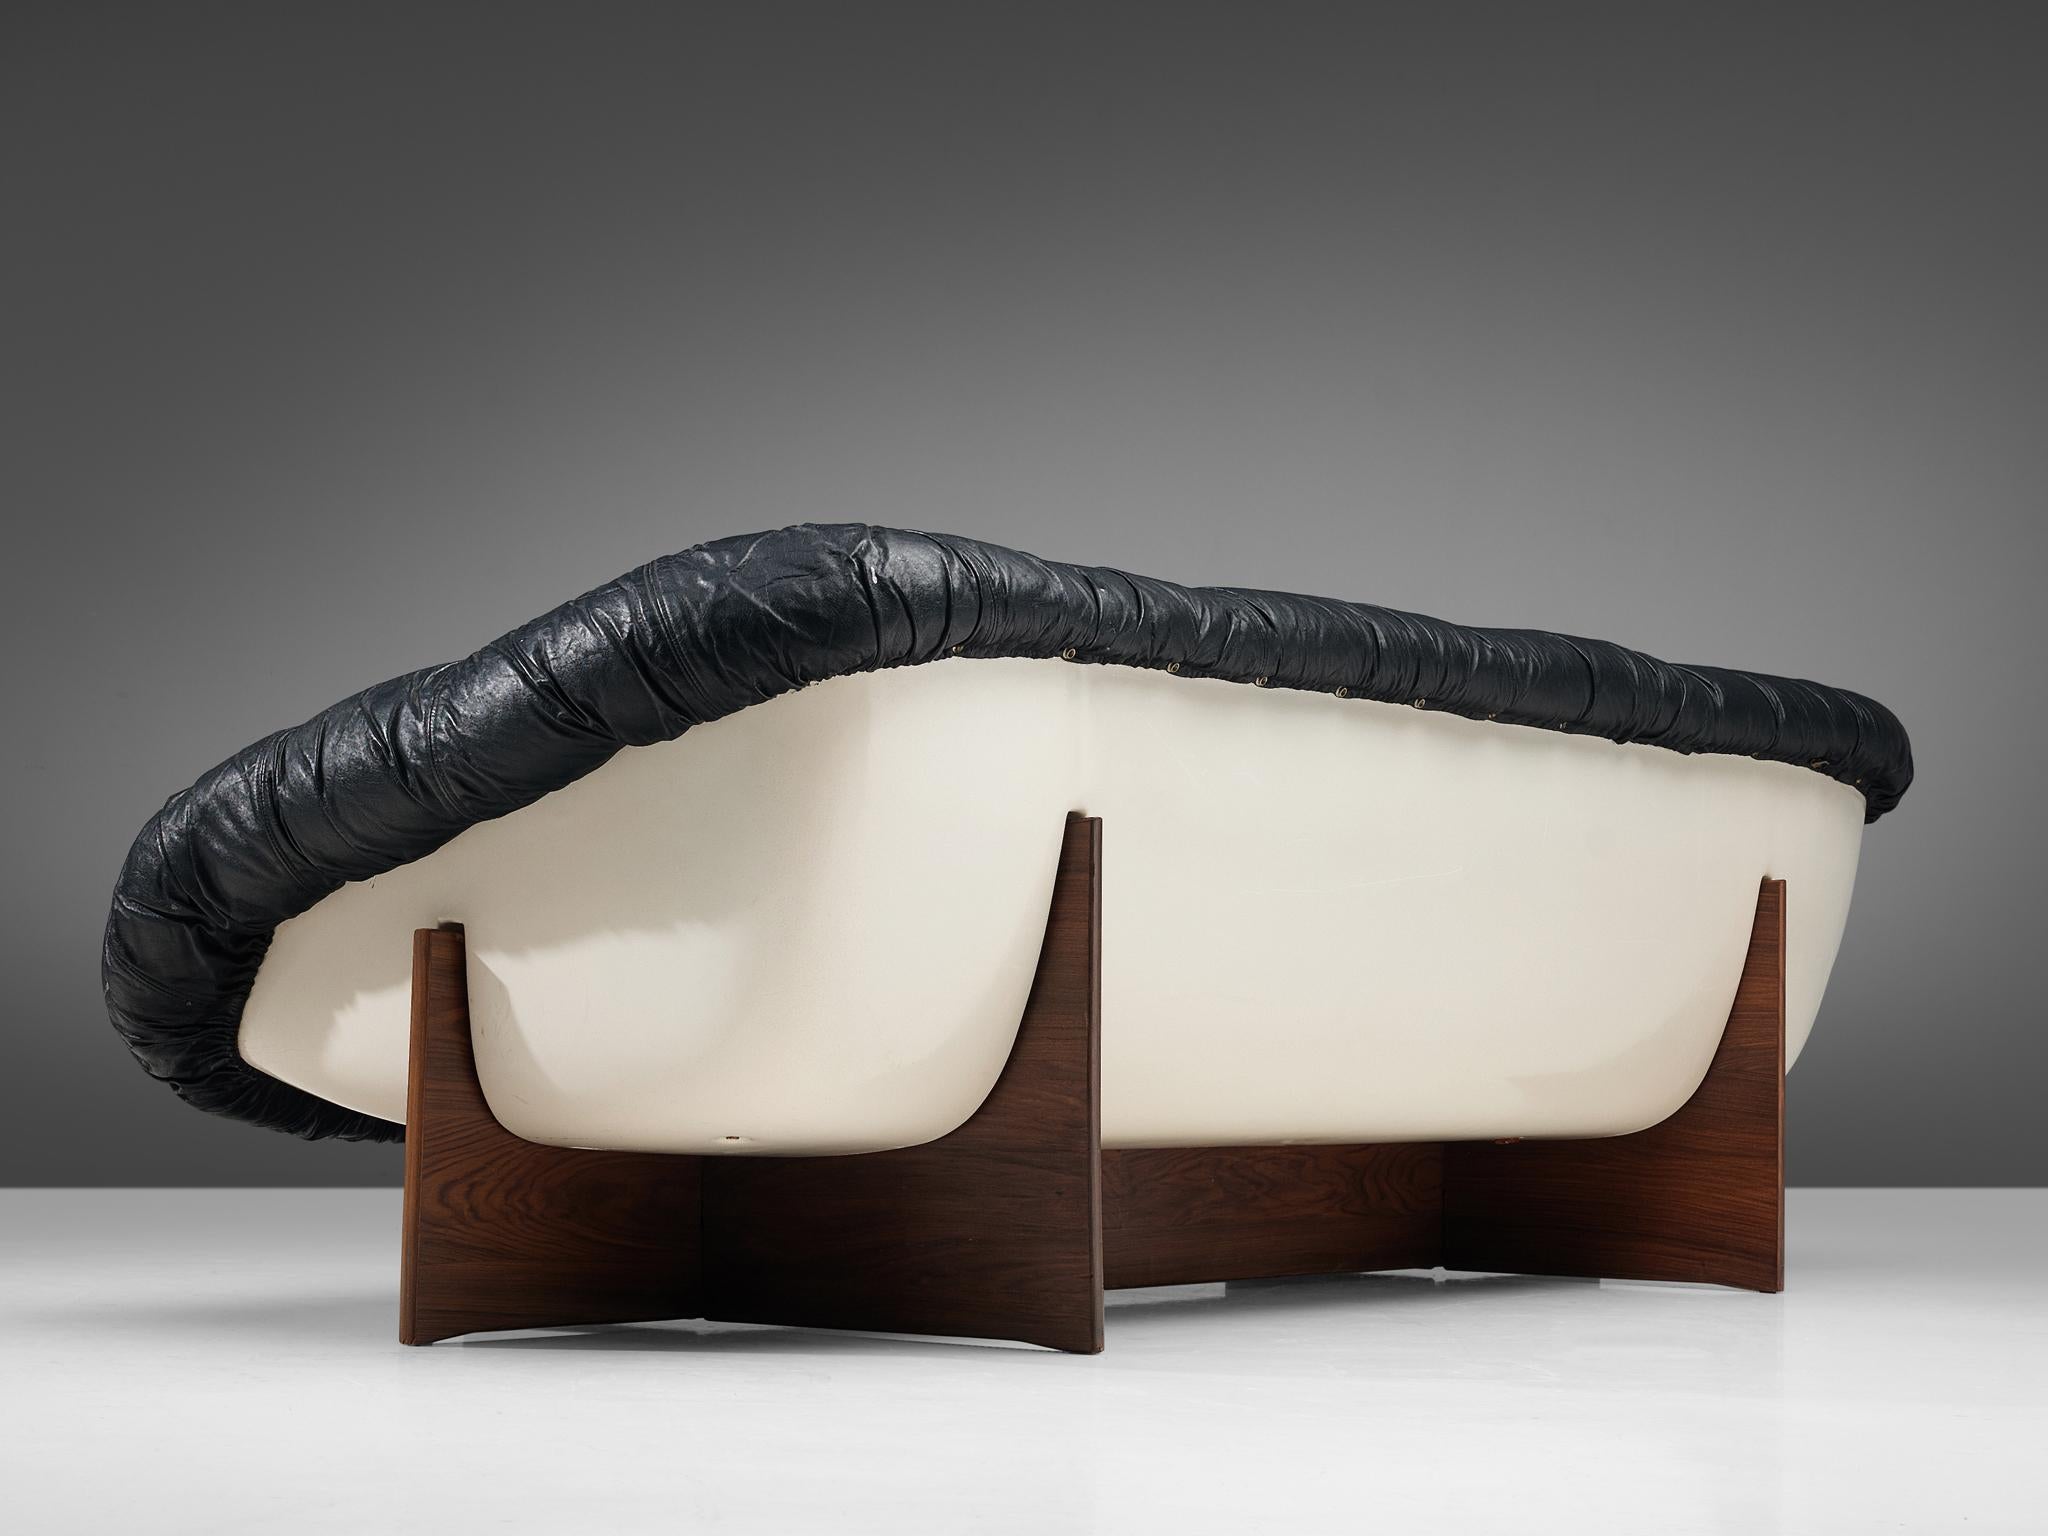 Percival Lafer, 'MP-61' sofa, Brazilian hardwood, leather and fiberglass, Brazil, 1970s

Bulky MP-61 sofa, designed by Percival Lafer in the 1970s. This sofa consists of a fiberglass shell which is white lacquered. It holds the black leather seat,